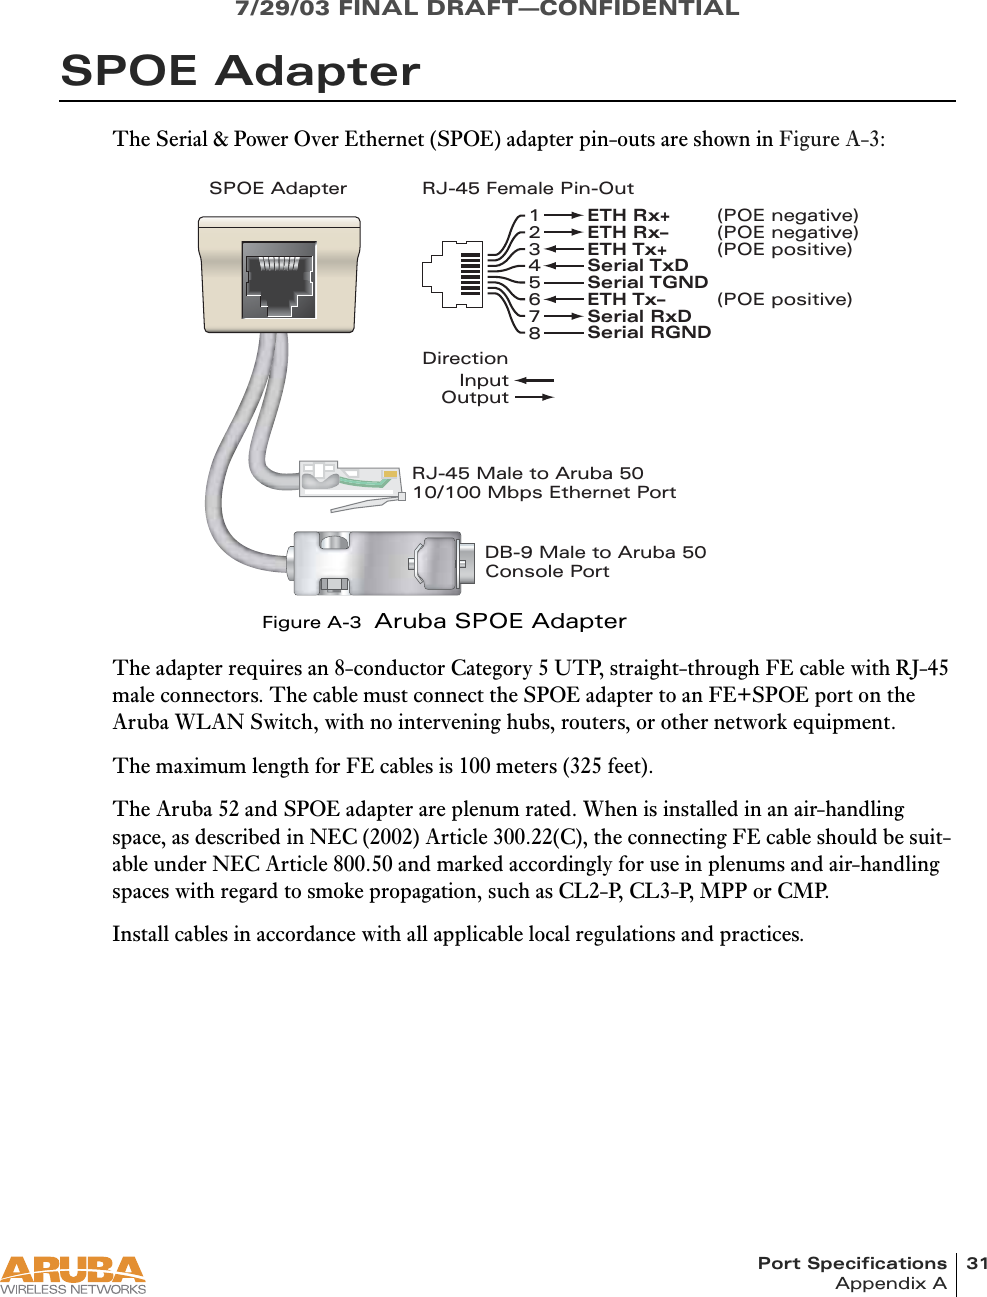 Port Specifications 31Appendix A7/29/03 FINAL DRAFT—CONFIDENTIALSPOE AdapterThe Serial &amp; Power Over Ethernet (SPOE) adapter pin-outs are shown in Figure A-3:Figure A-3  Aruba SPOE AdapterThe adapter requires an 8-conductor Category 5 UTP, straight-through FE cable with RJ-45 male connectors. The cable must connect the SPOE adapter to an FE+SPOE port on the Aruba WLAN Switch, with no intervening hubs, routers, or other network equipment.The maximum length for FE cables is 100 meters (325 feet).The Aruba 52 and SPOE adapter are plenum rated. When is installed in an air-handling space, as described in NEC (2002) Article 300.22(C), the connecting FE cable should be suit-able under NEC Article 800.50 and marked accordingly for use in plenums and air-handling spaces with regard to smoke propagation, such as CL2-P, CL3-P, MPP or CMP.Install cables in accordance with all applicable local regulations and practices.SPOE AdapterSerial TxDSerial TGNDSerial RxDSerial RGNDRJ-45 Male to Aruba 5010/100 Mbps Ethernet PortRJ-45 Female Pin-OutDB-9 Male to Aruba 50Console Port12345678ETH Rx+ (POE negative)ETH Rx– (POE negative)ETH Tx+ (POE positive)ETH Tx– (POE positive)DirectionInputOutput